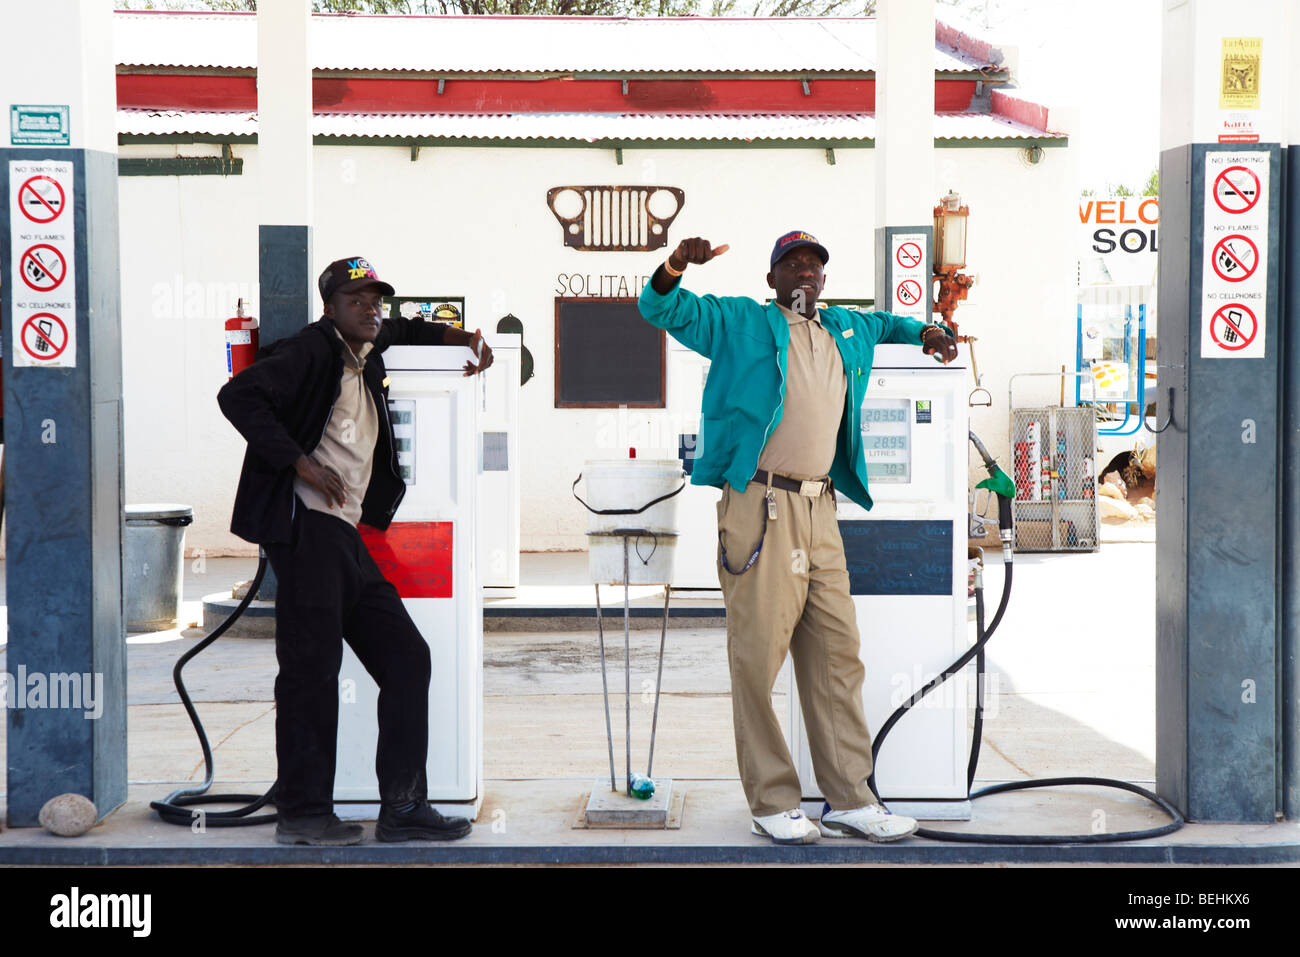 gas station attendant ,Solitaire, Namibia Stock Photo